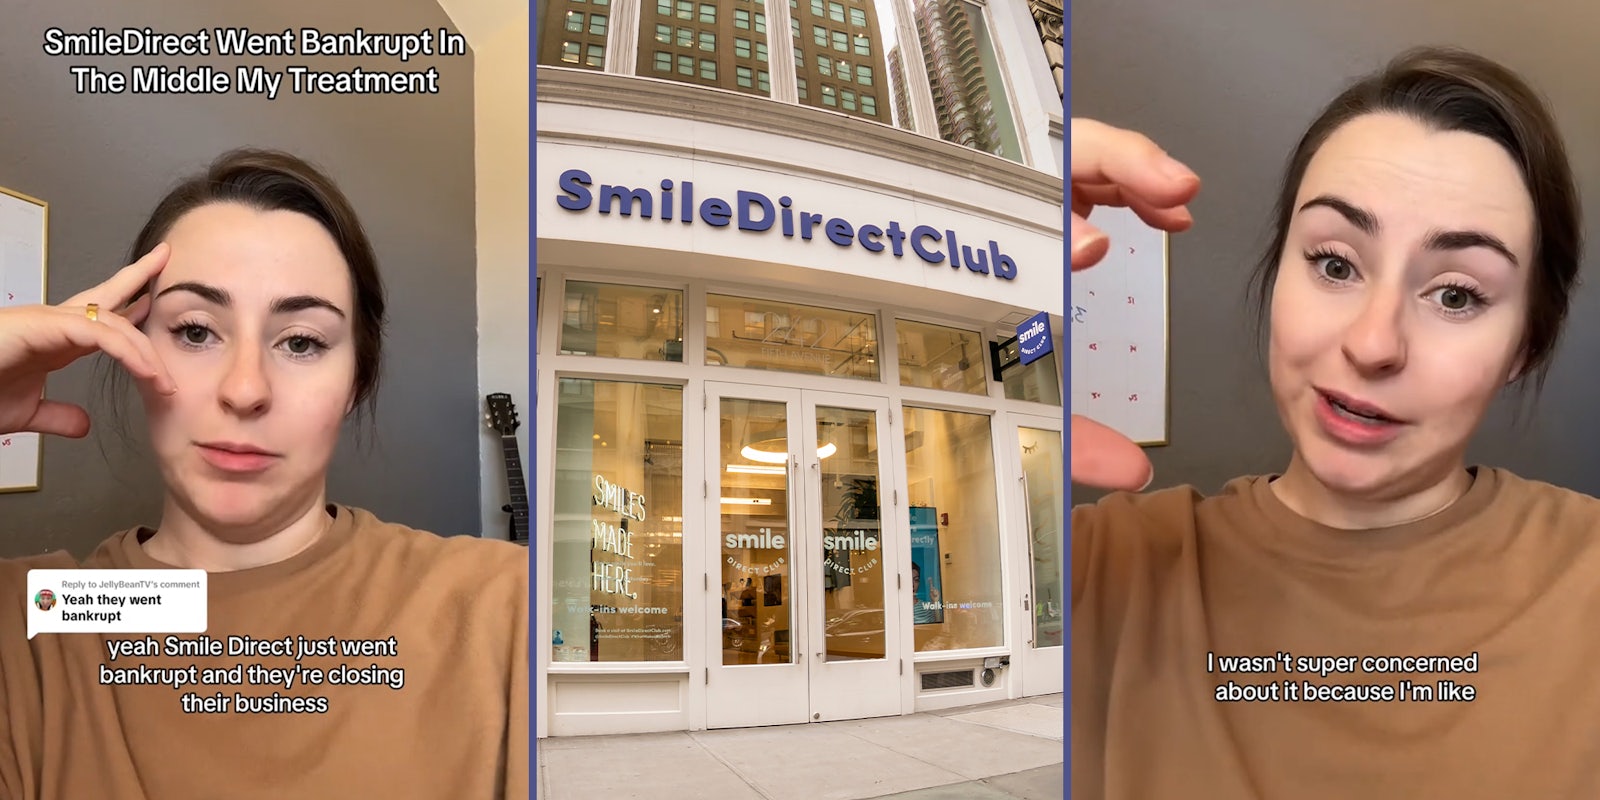 Woman says SmileDirectClub shut down in the middle of her treatment